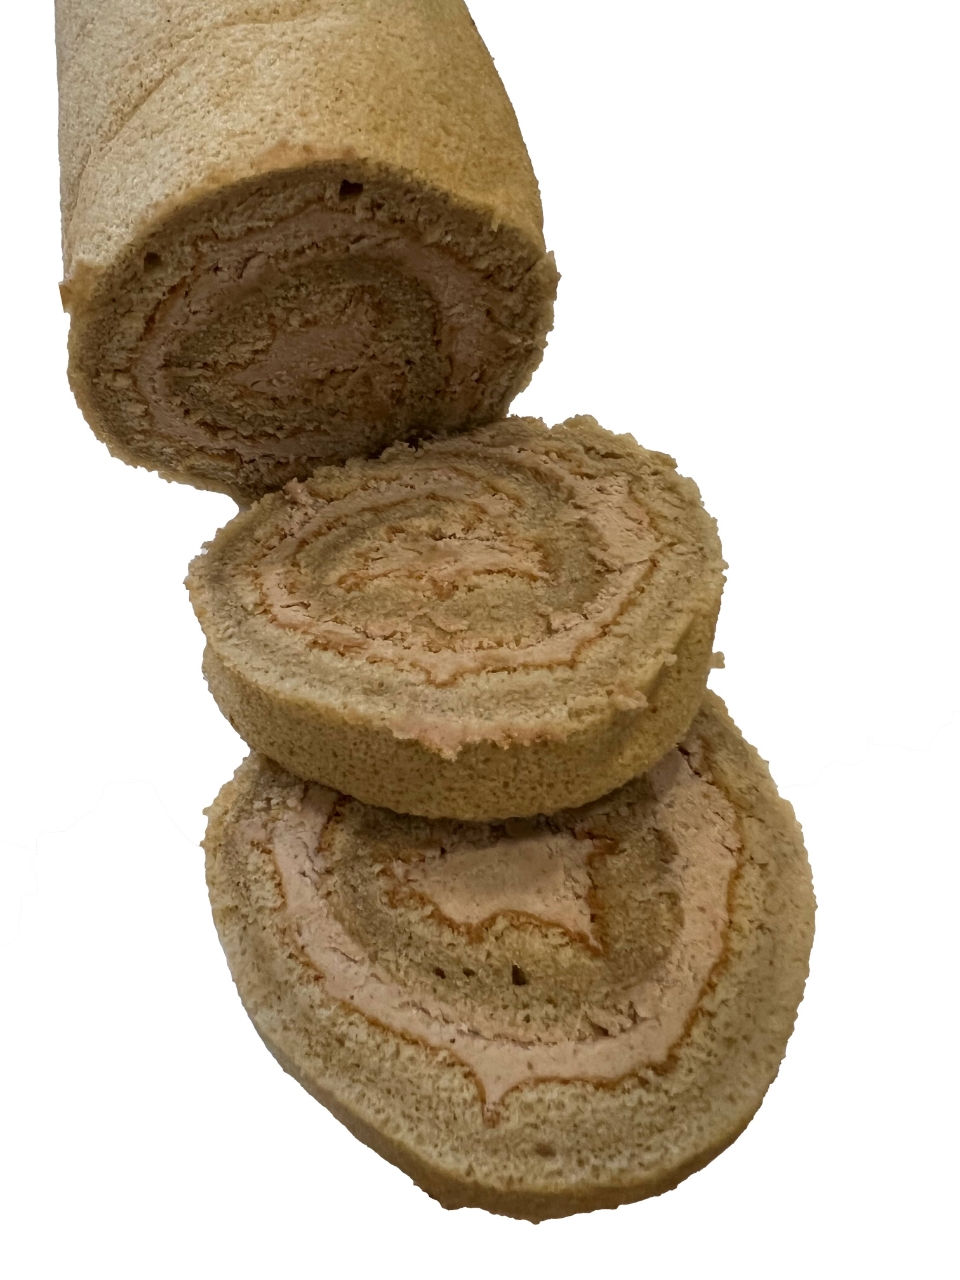 Picture of Coffee Swiss Rolls (fresh baked)- 1LB